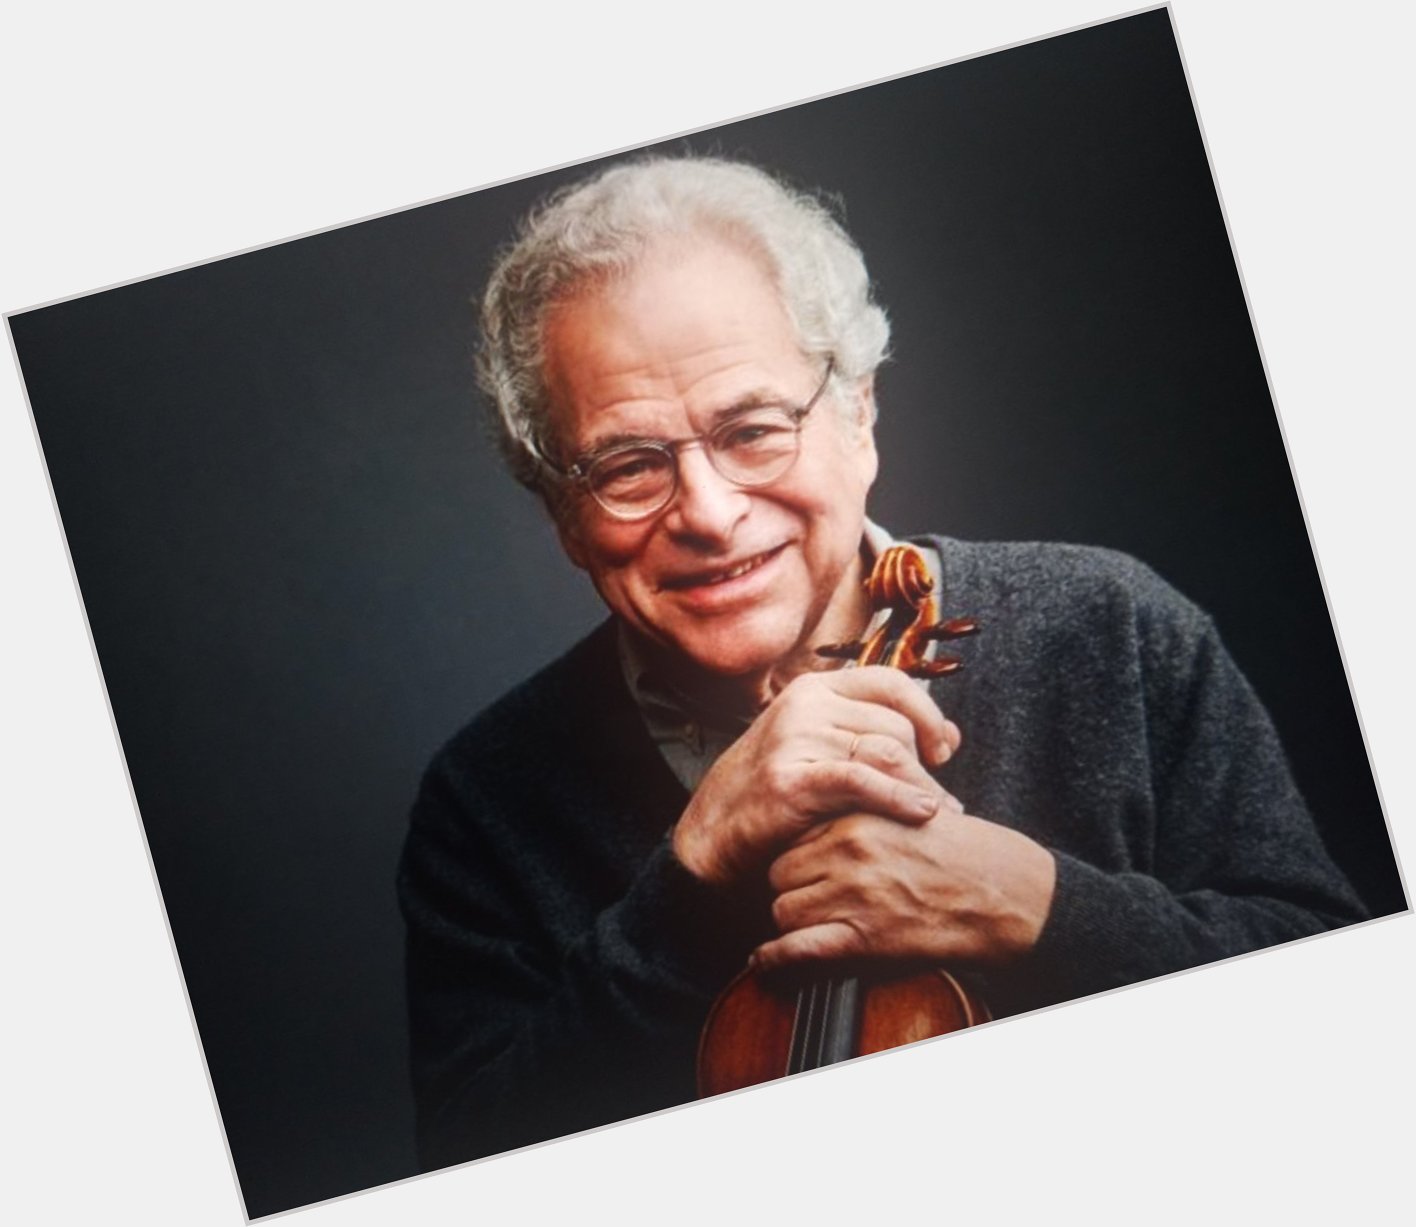 Happy Birthday Mr. Itzhak Perlman
You are a gift to the World 